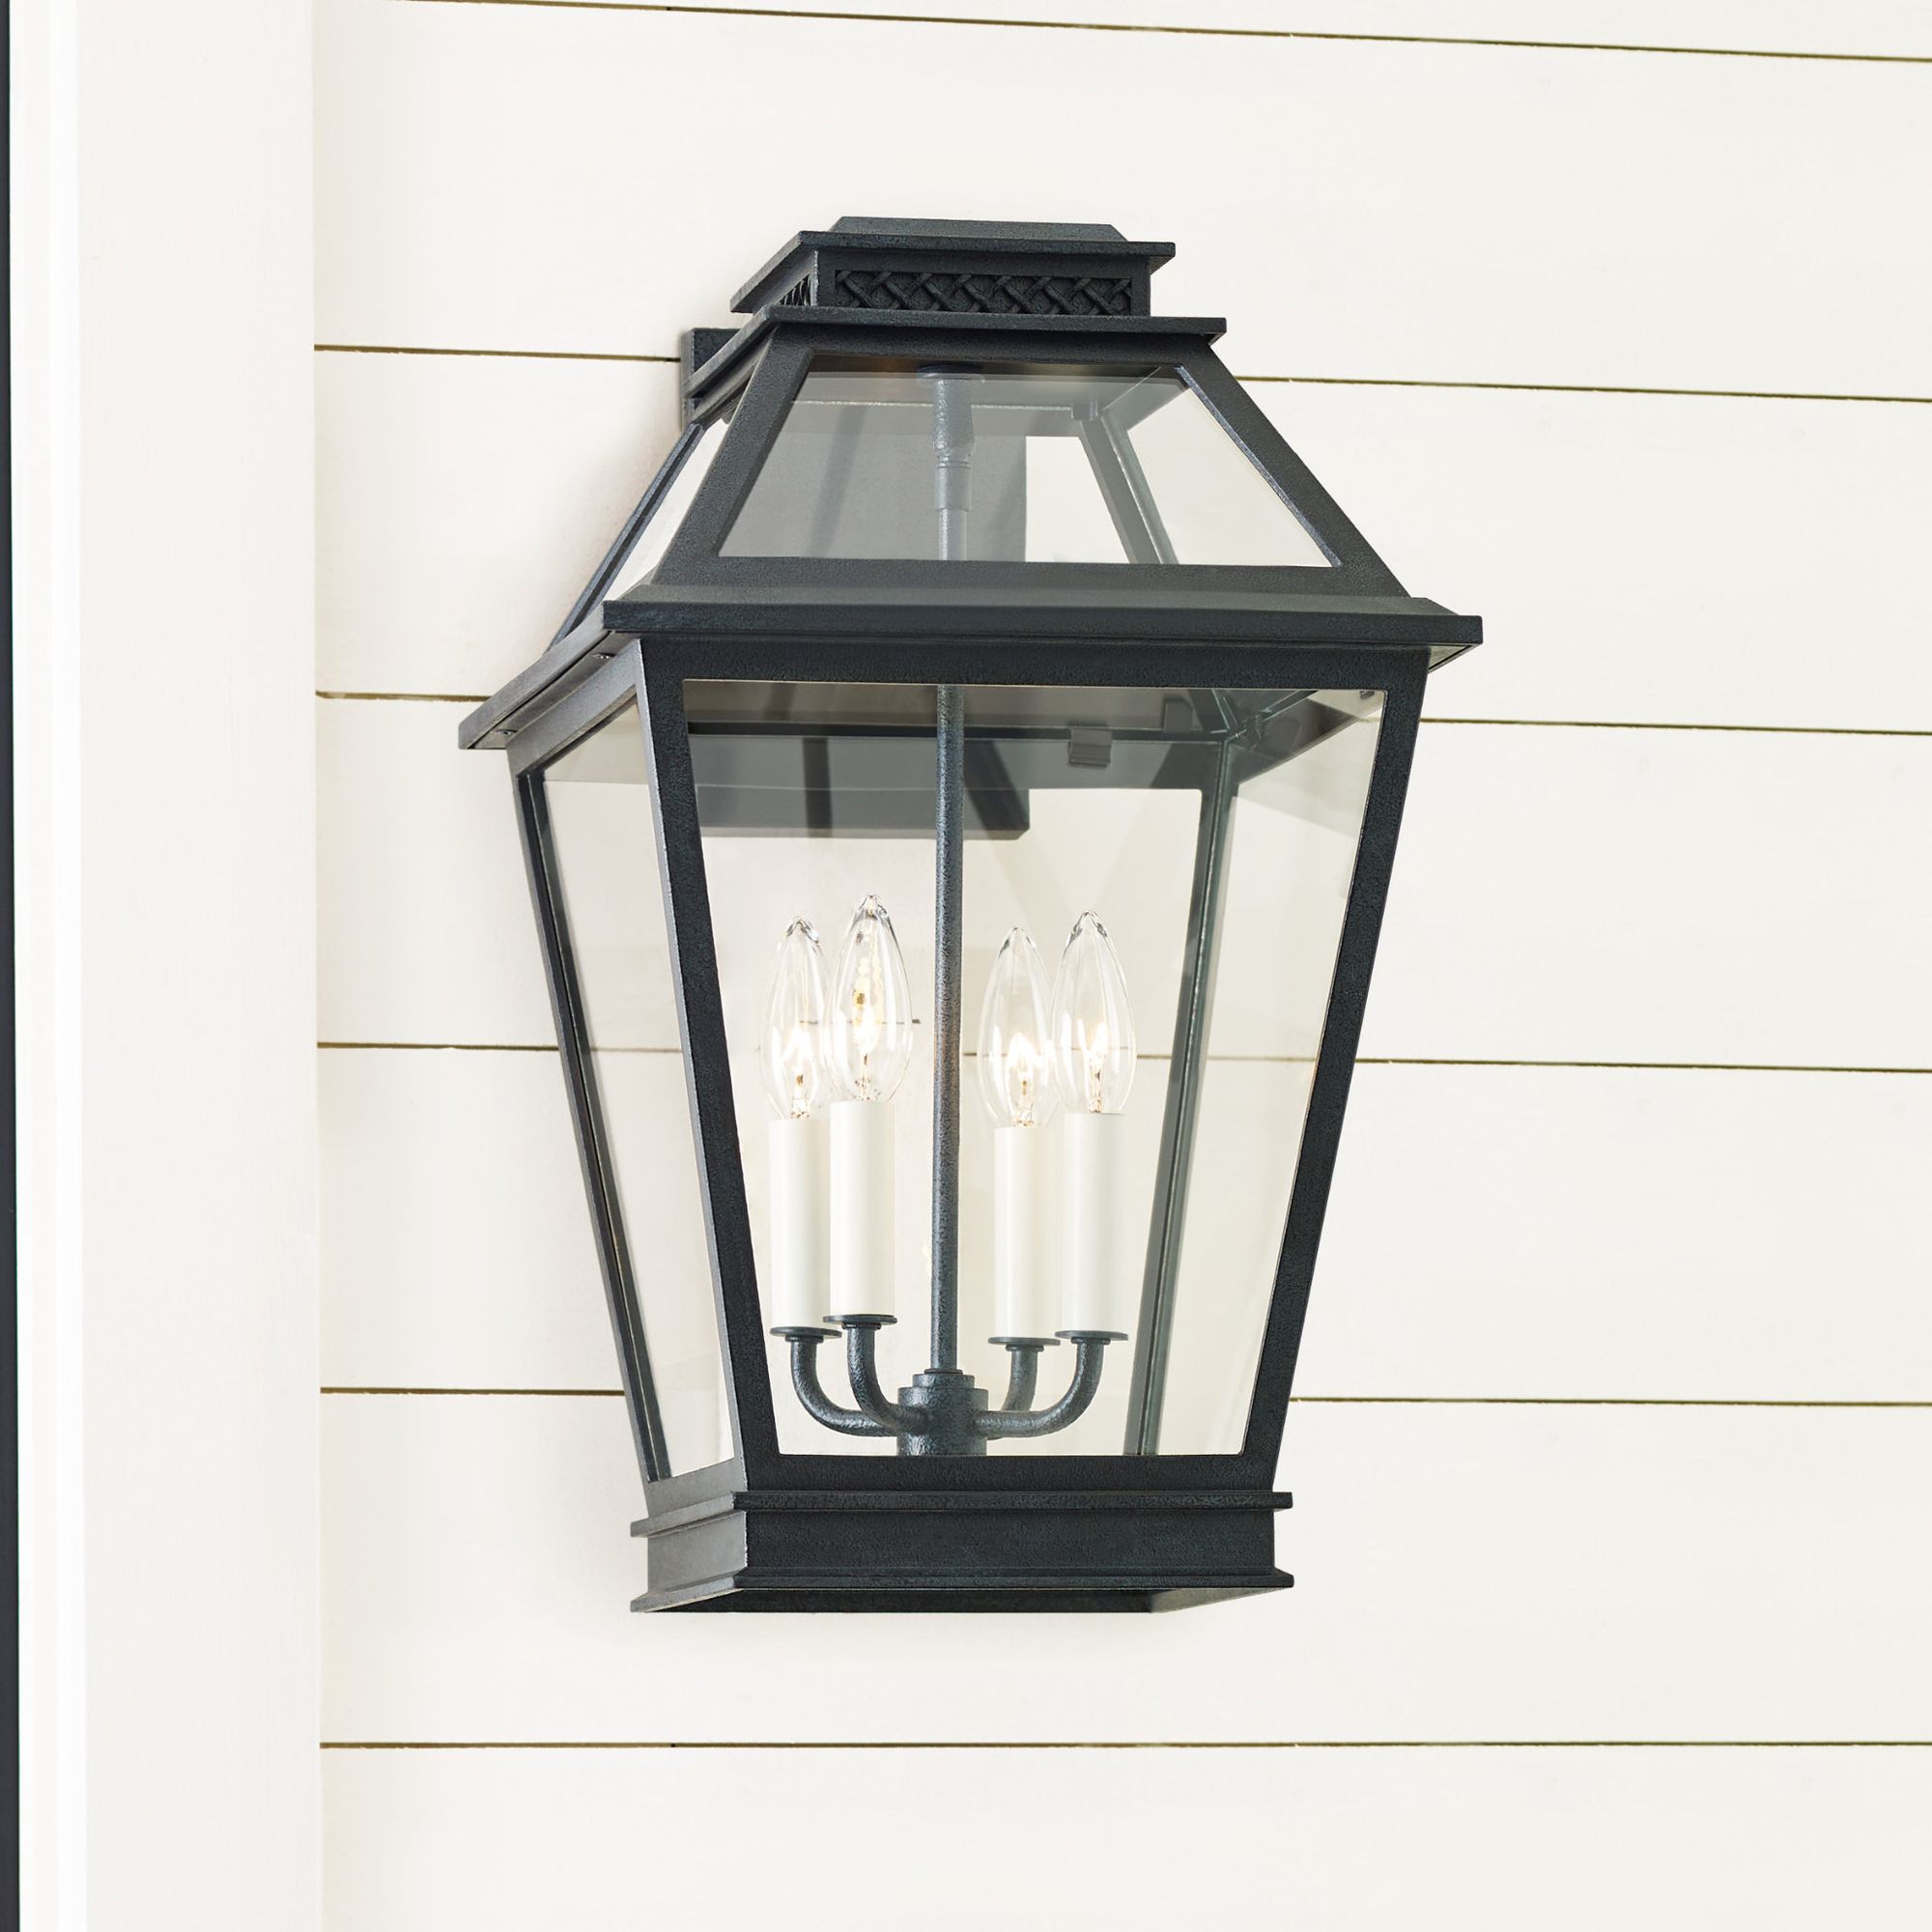 Chapman & Myers Falmouth Large Outdoor Wall Lantern in Dark Weathered Zinc